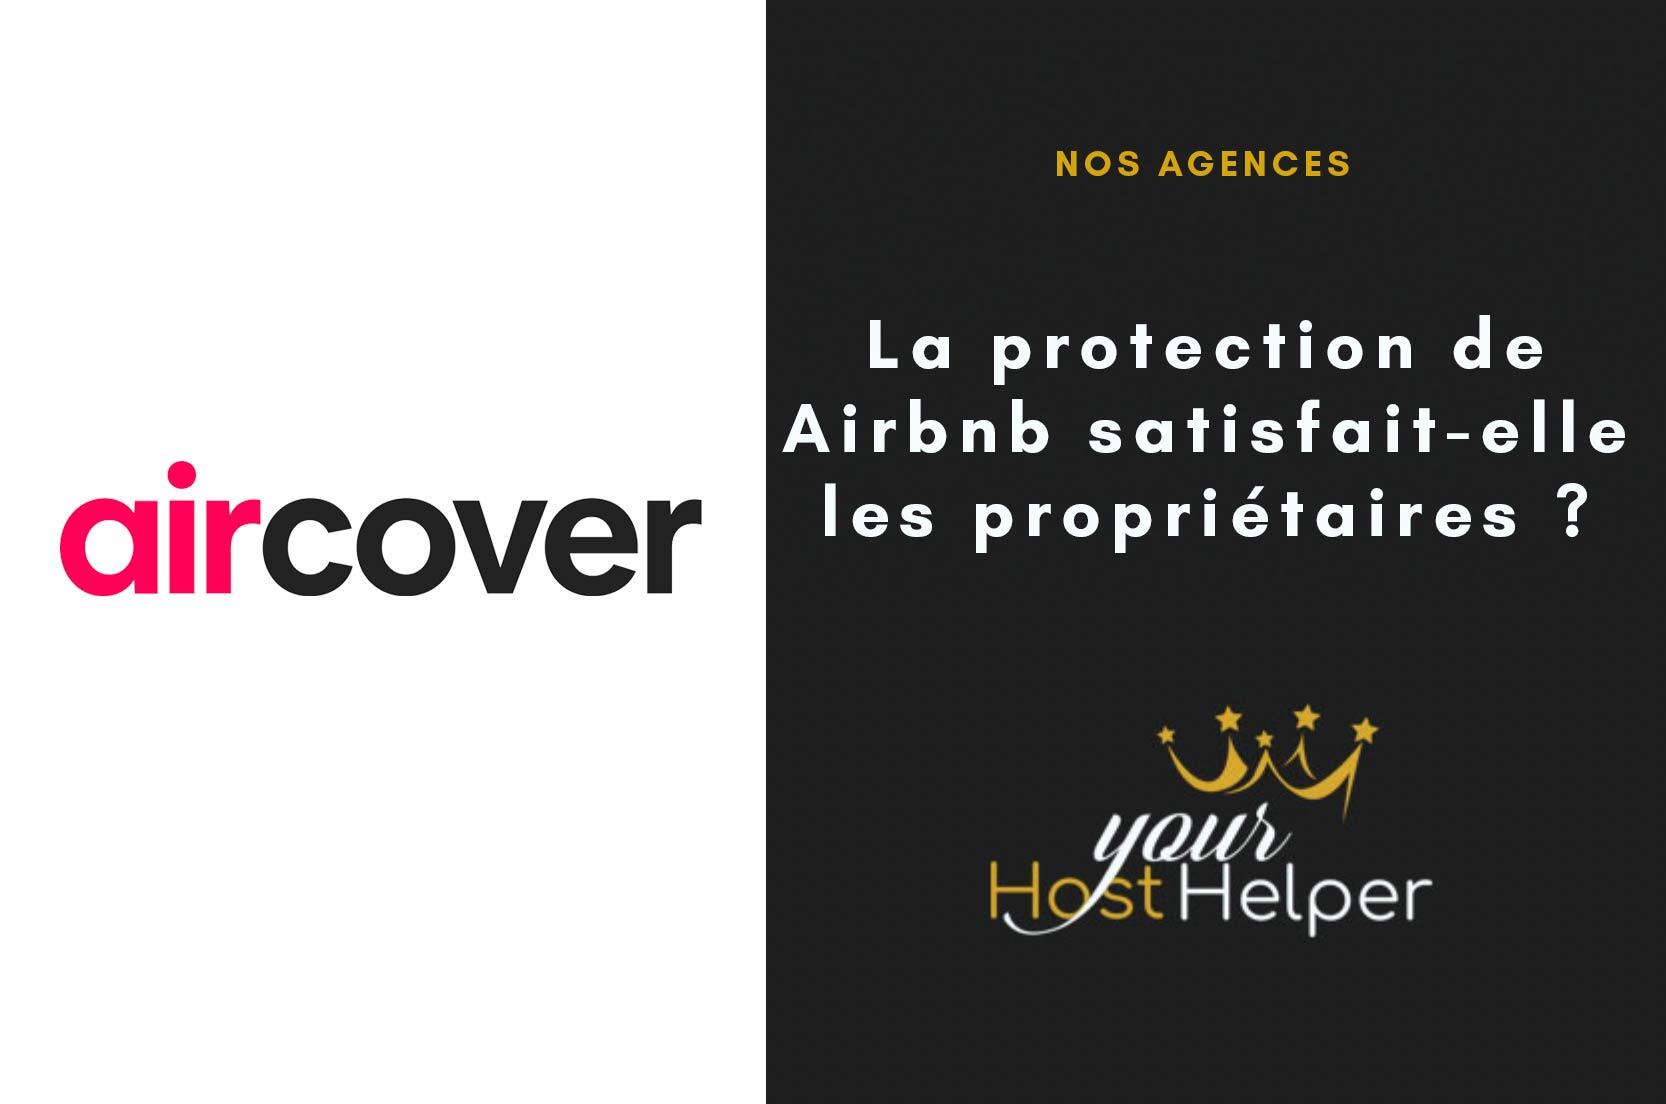 You are currently viewing Aircover Review: Does Airbnb's Protection Satisfy Landlords?